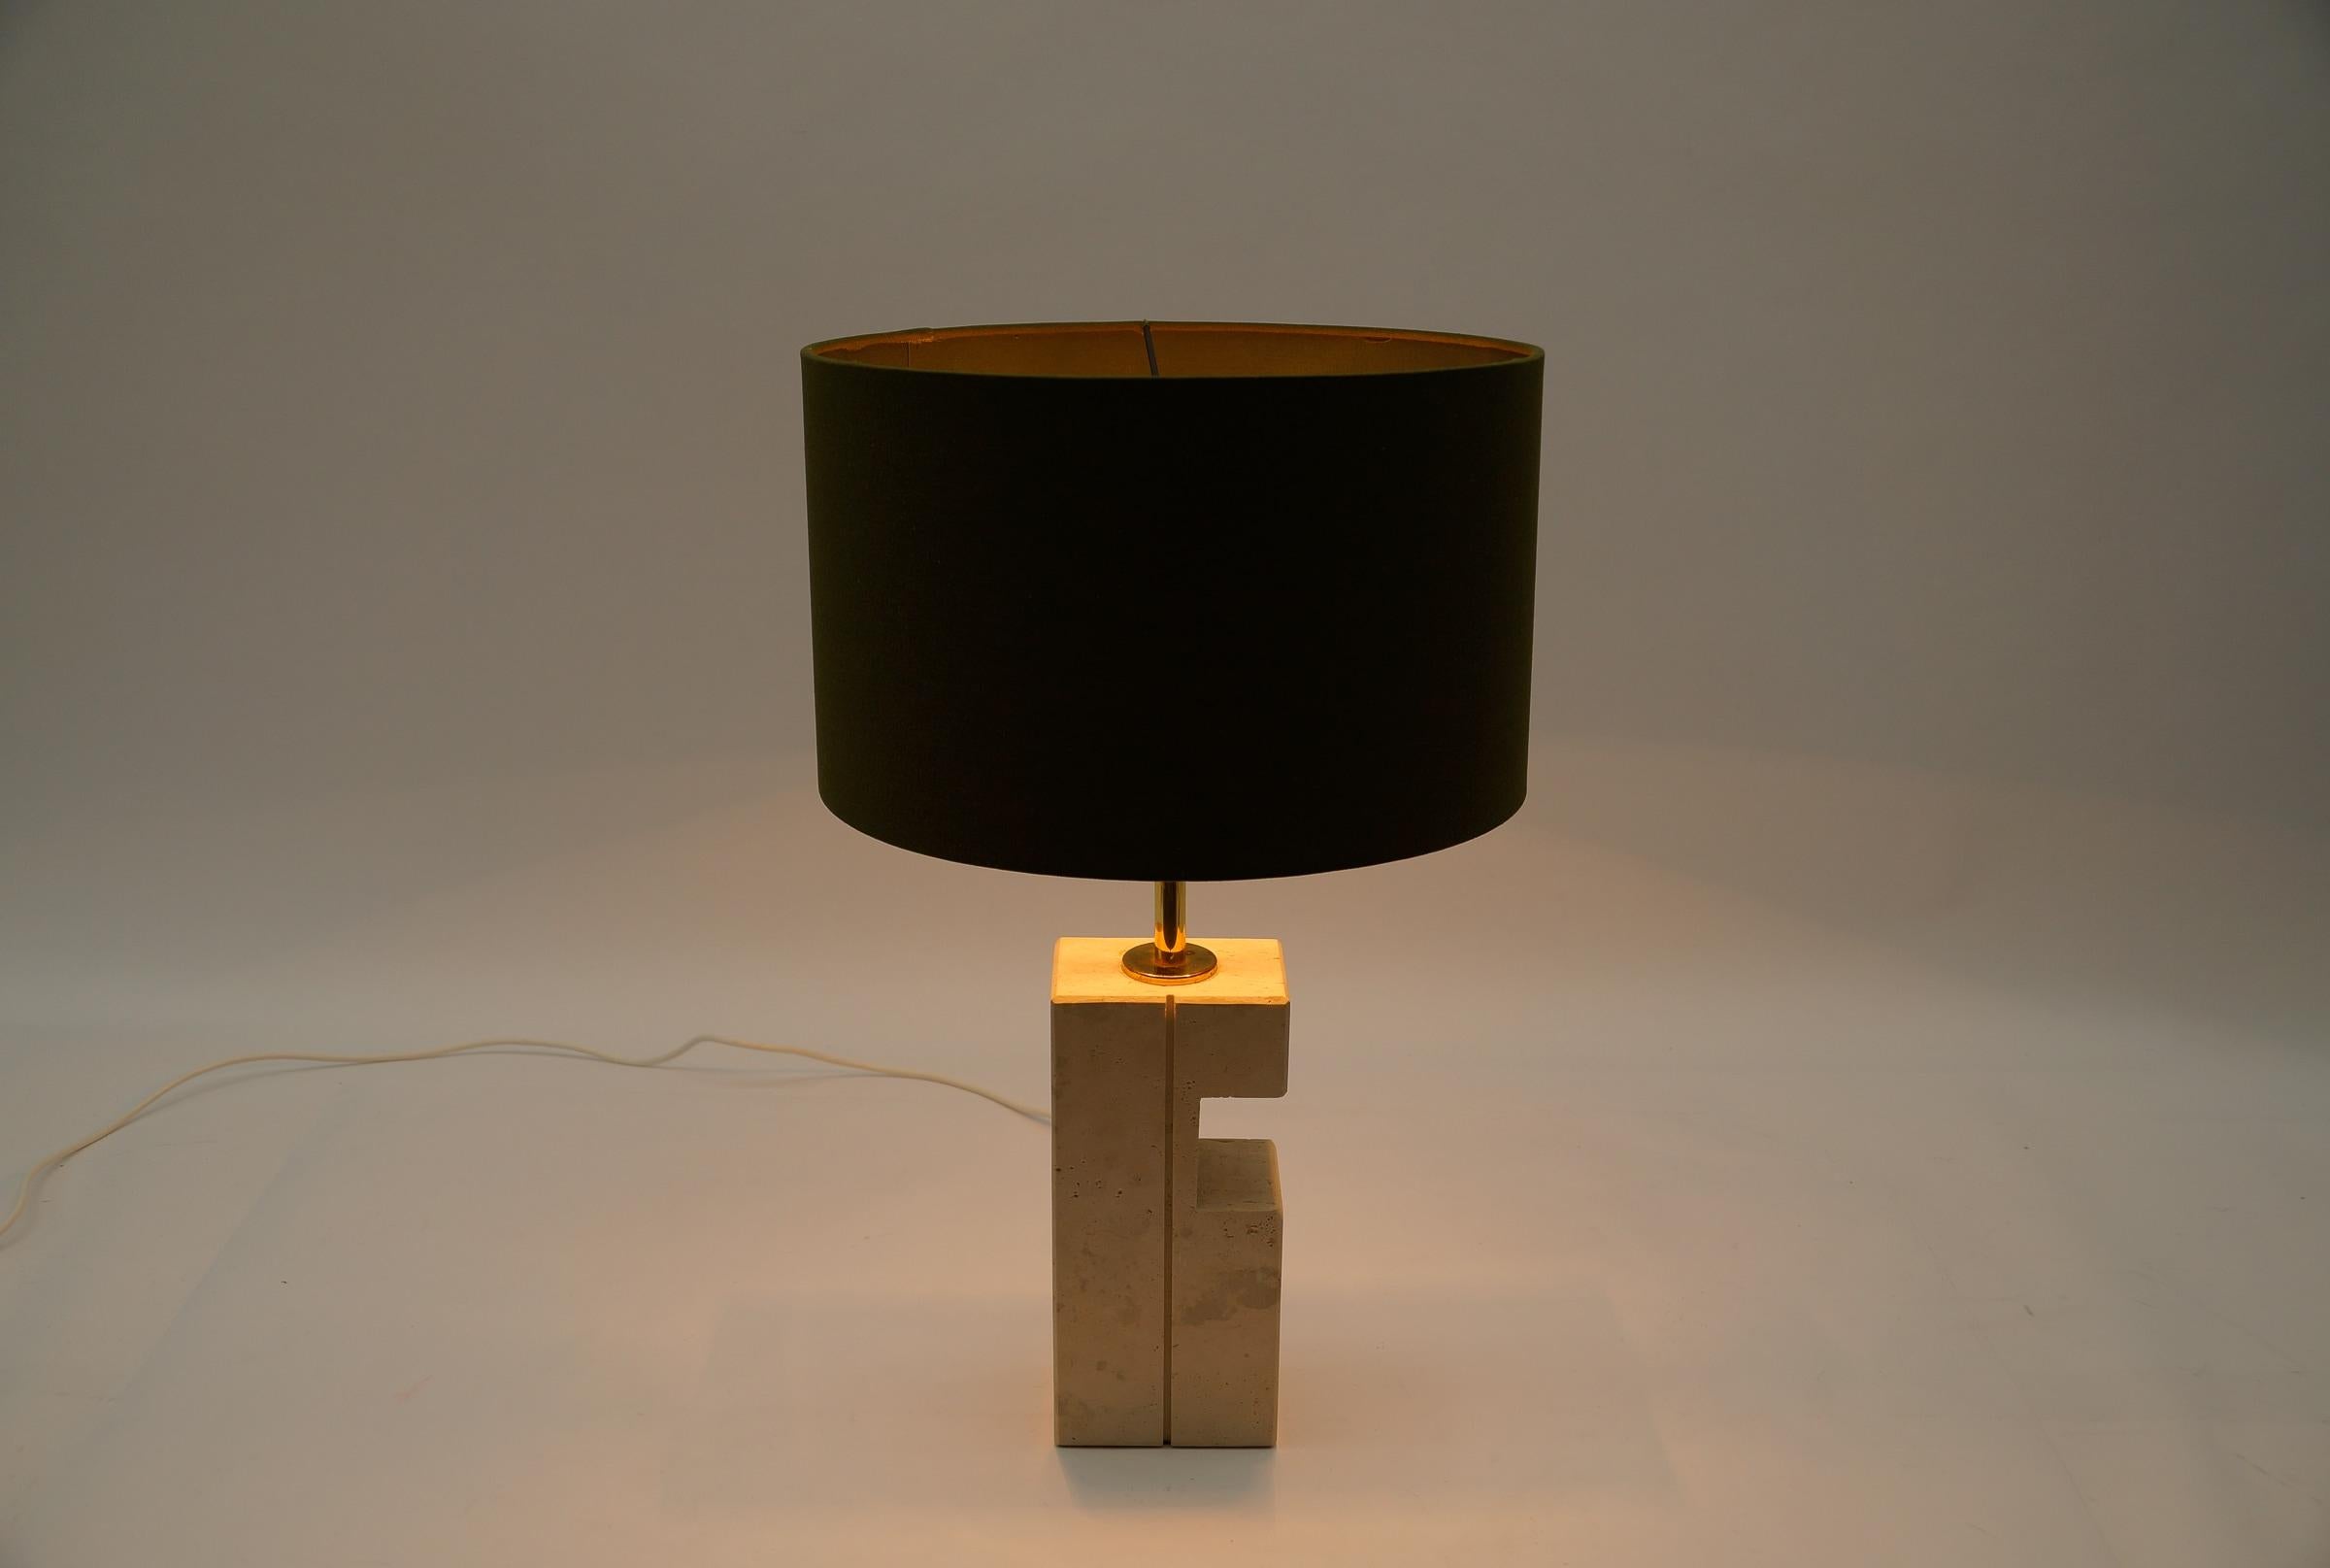 Italian Lovely Travertine Table Lamp by Giuliano Cesari for Nucleo Sormani, 1960s, Italy For Sale